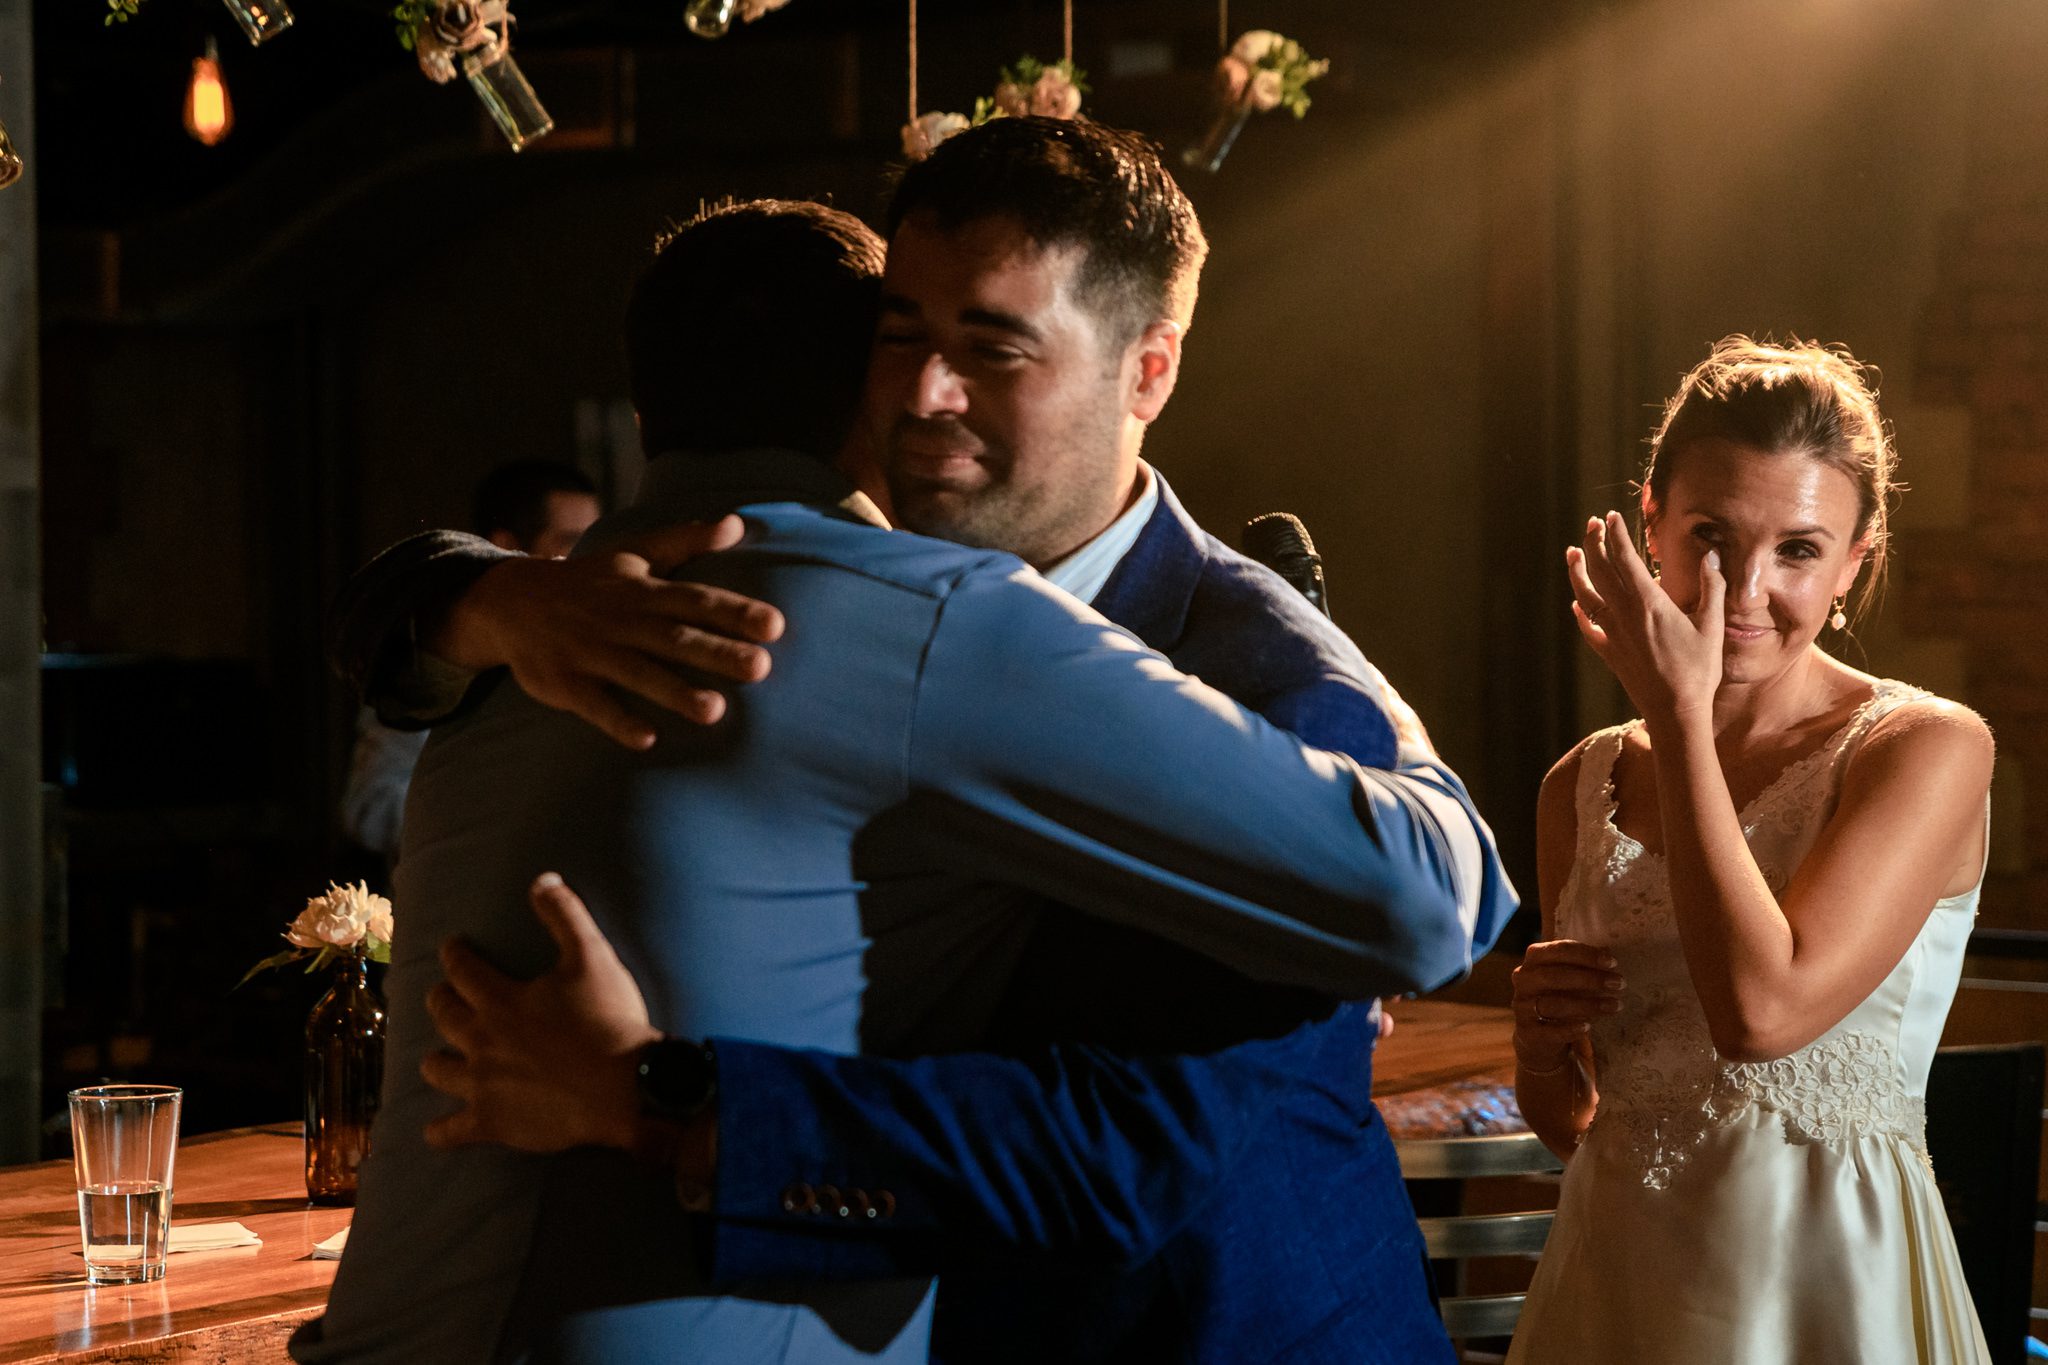 A bride and groom hugging at their wedding reception captured by a documentary wedding photographer at Crest Pavilion.